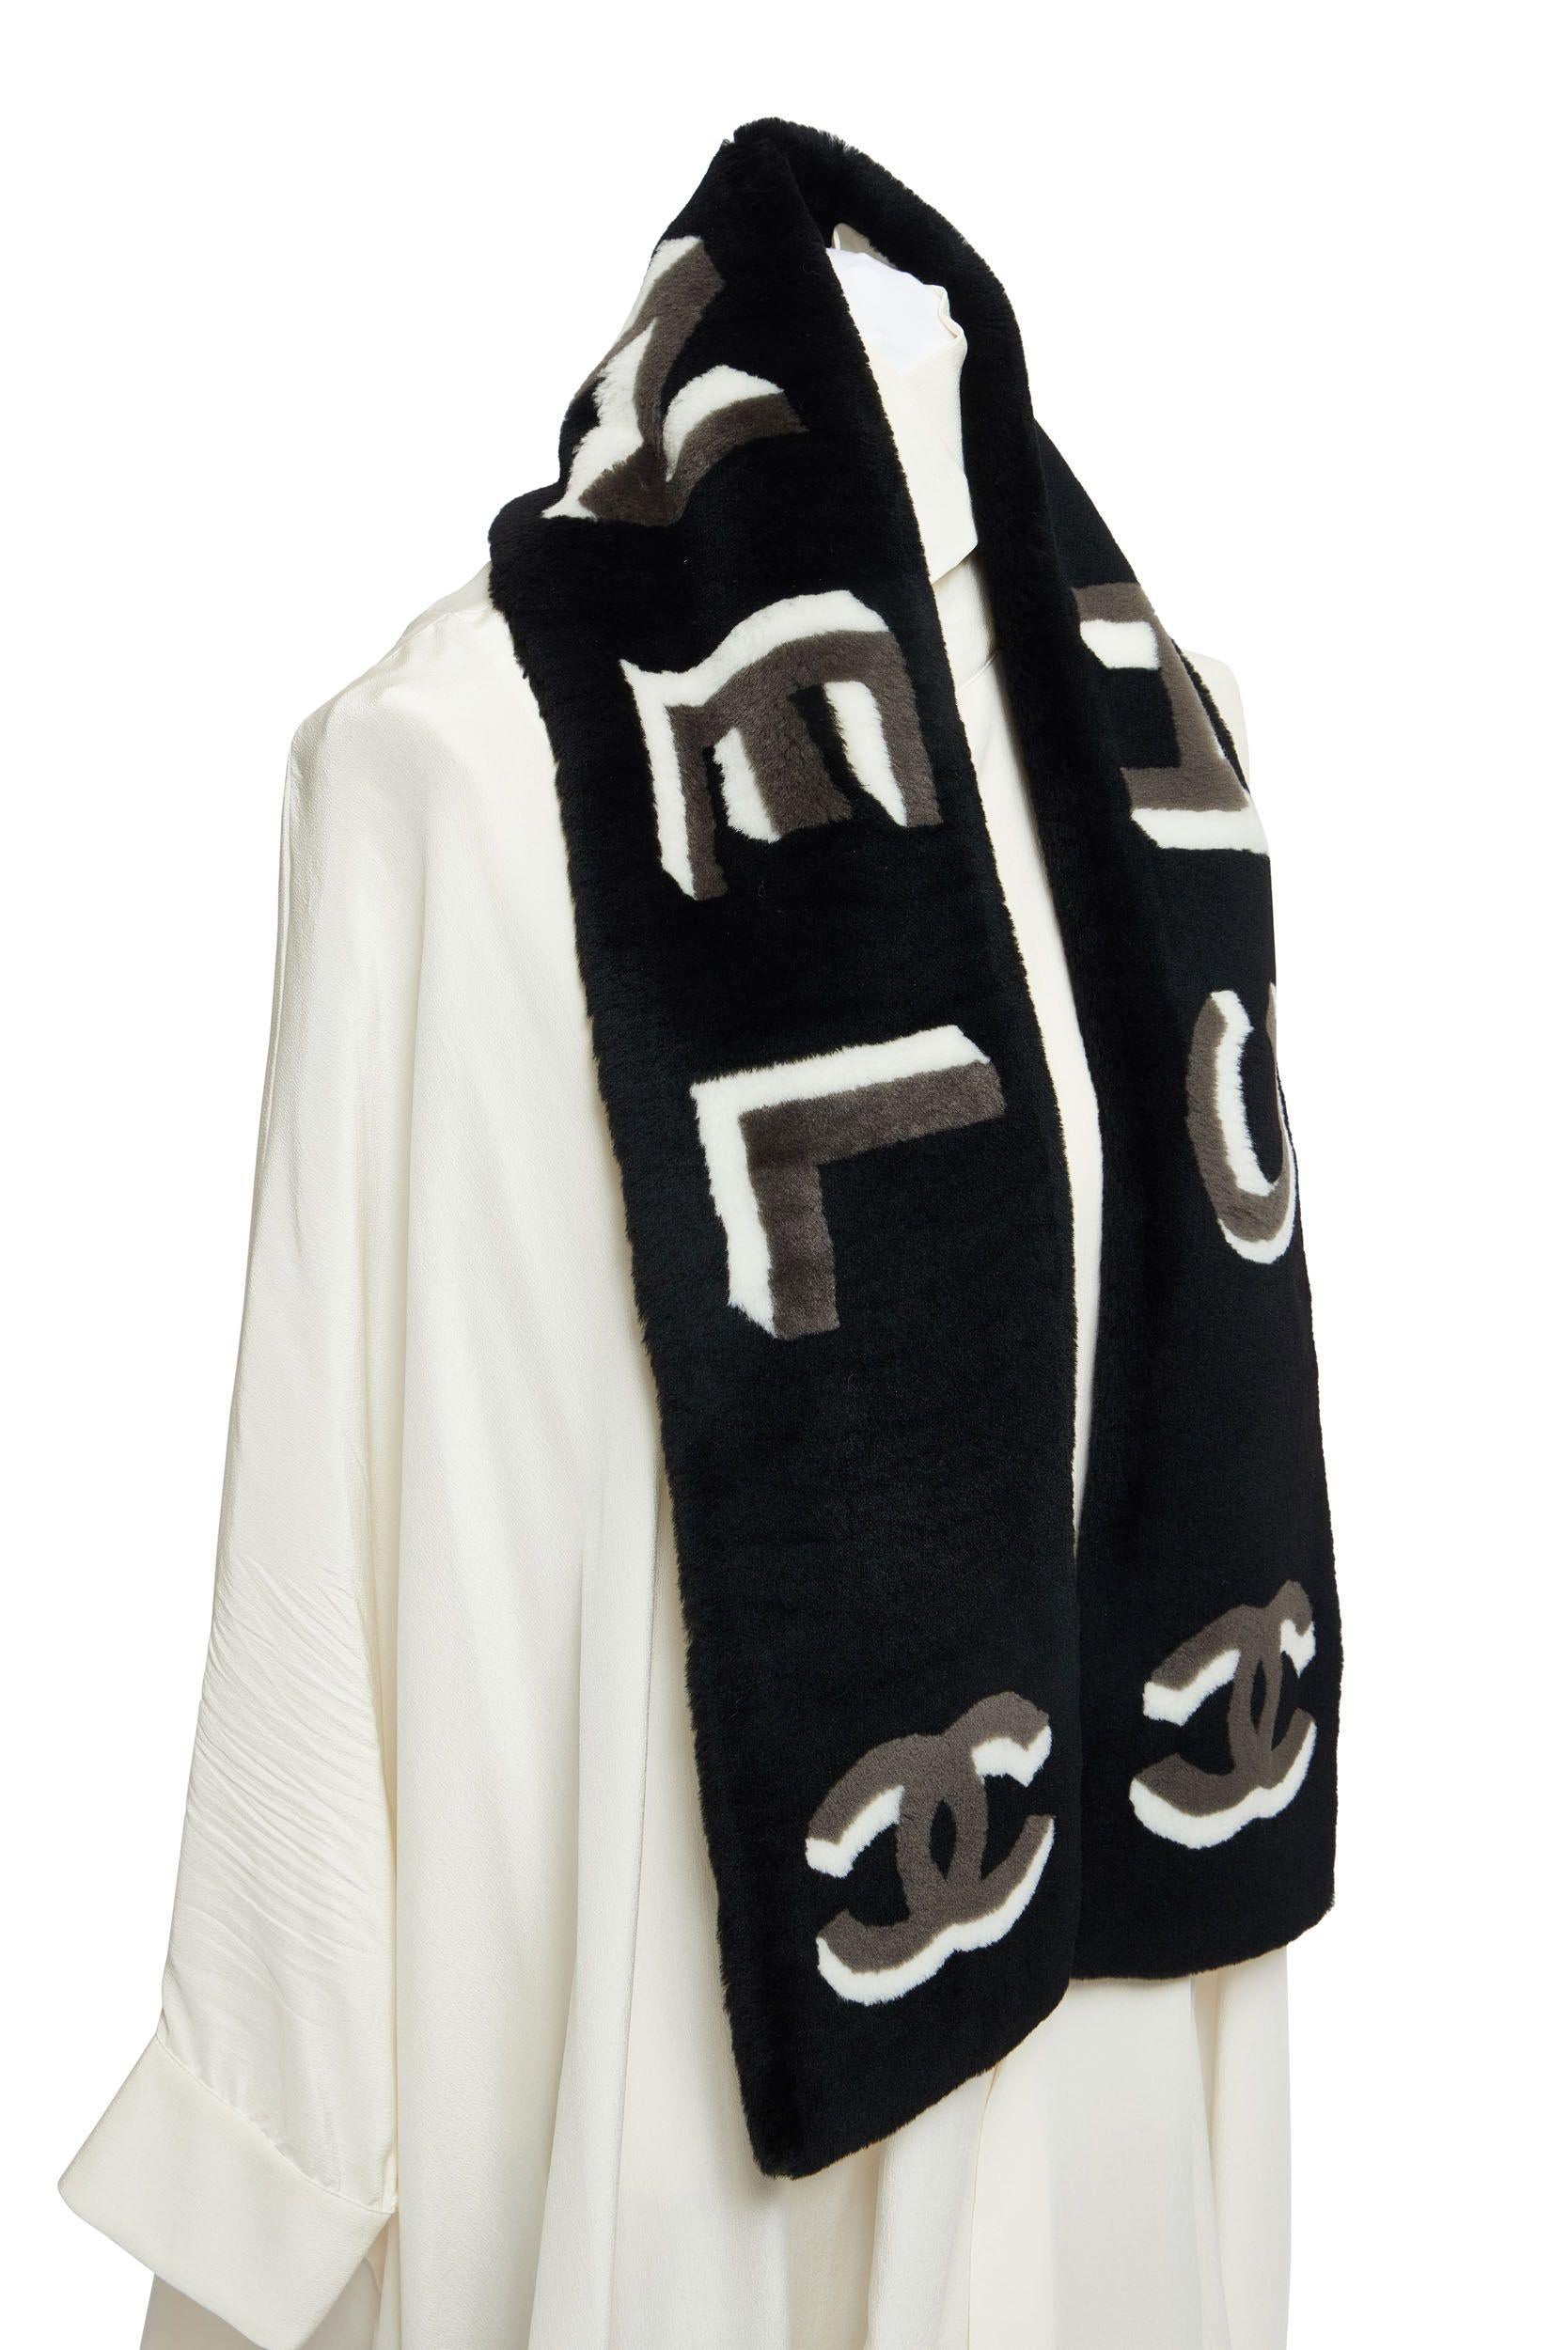 New Chanel black sheepskin scarf with white and grey three-dimensional Chanel letters and CC logo. Warm black cashmere lining.